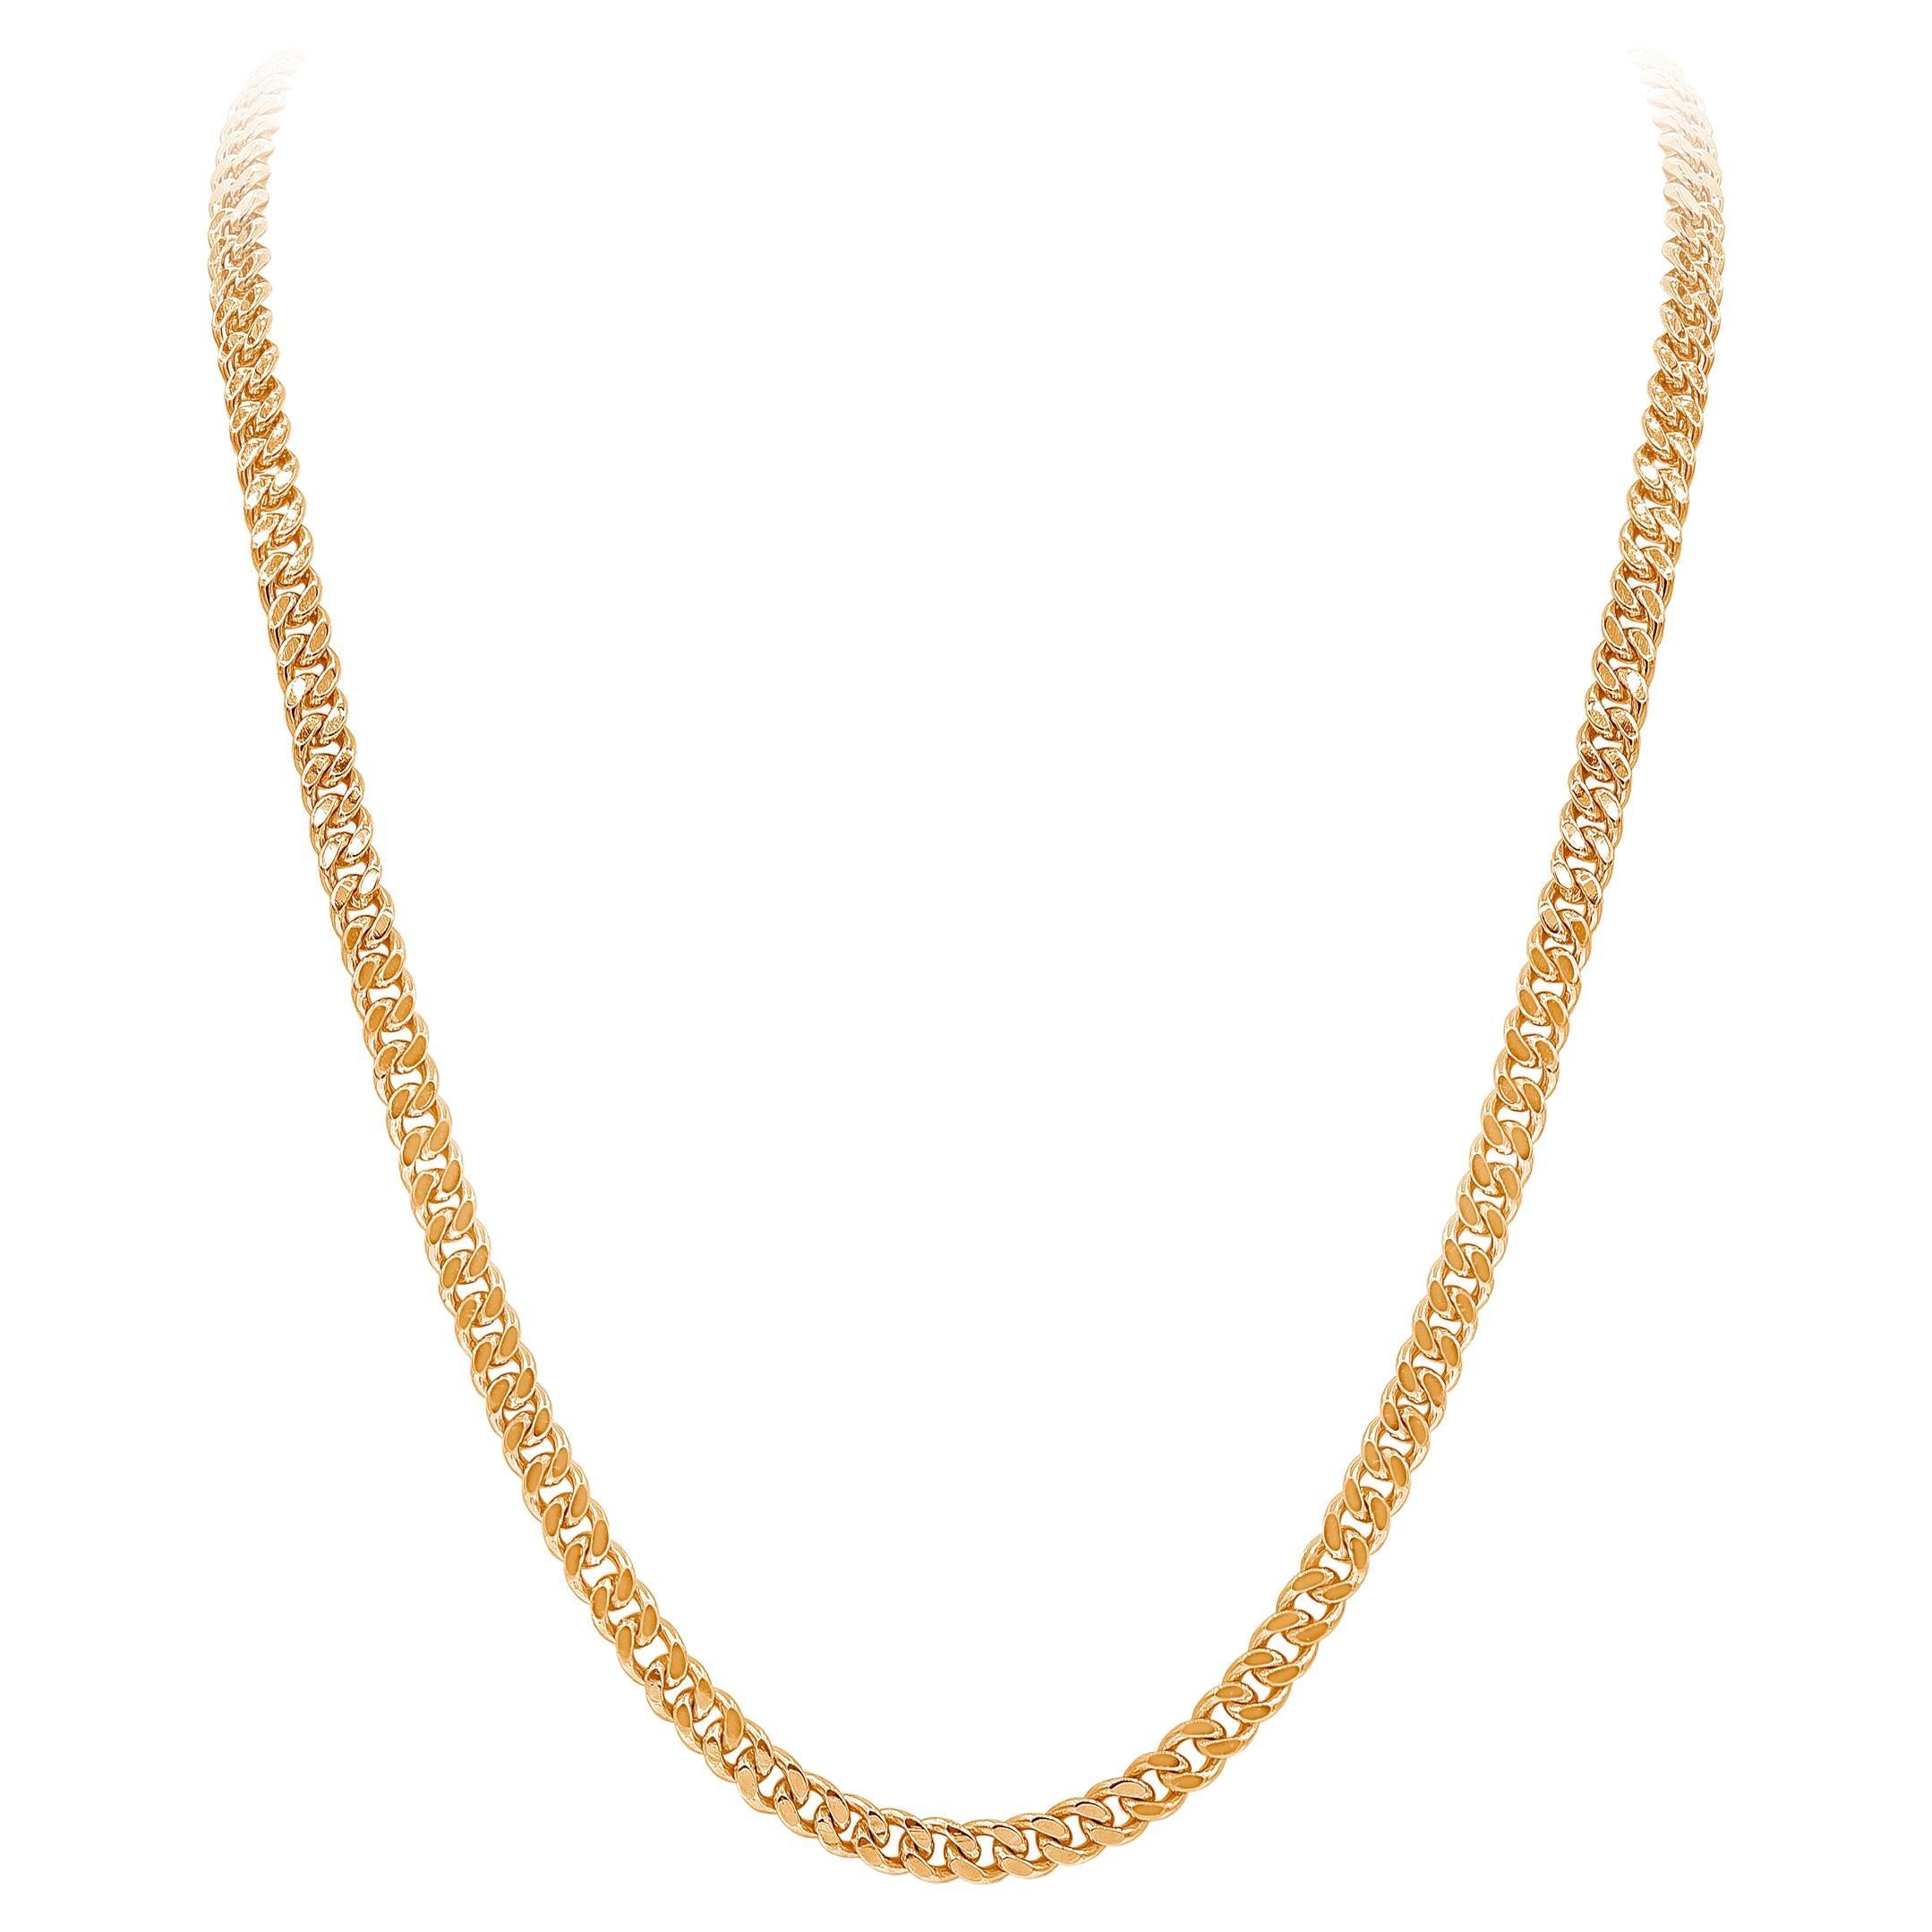 76 Grams Rose Gold Cuban Link Chain Necklace